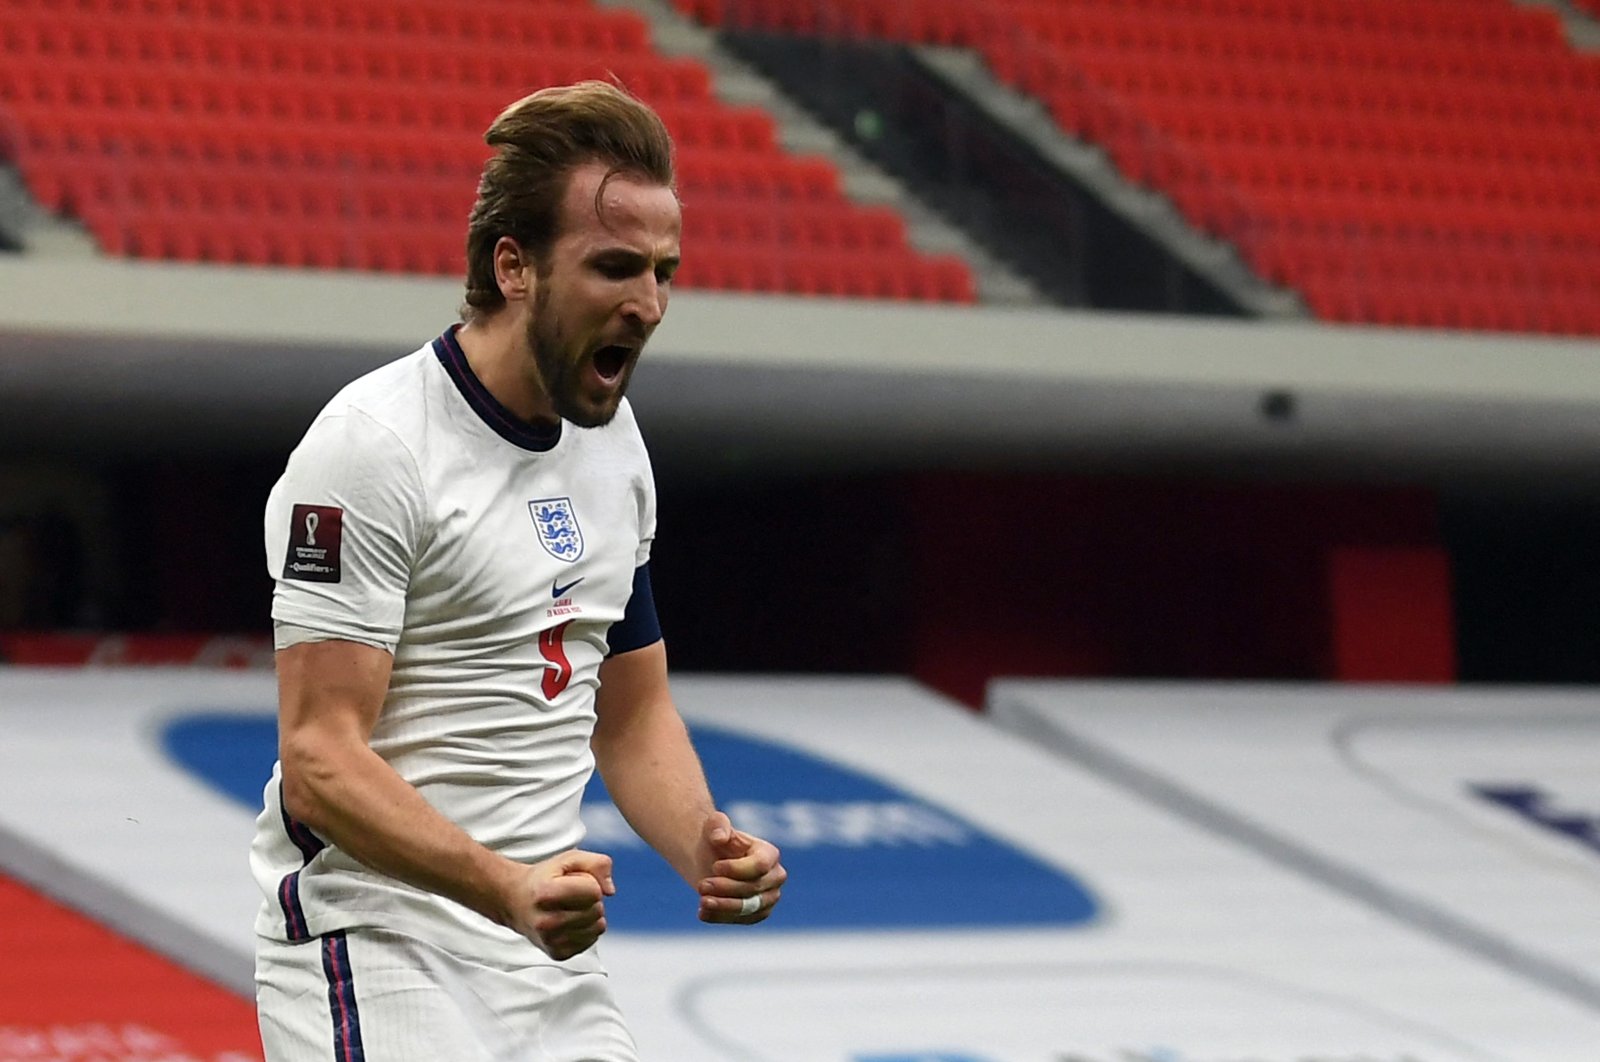 England's forward Harry Kane celebrates after scoring a goal during the FIFA World Cup Qatar 2022 qualification Group I football match between Albania and England at the Arena Kombetare, in Tirana, Albania, March 28, 2021. (AFP Photo)